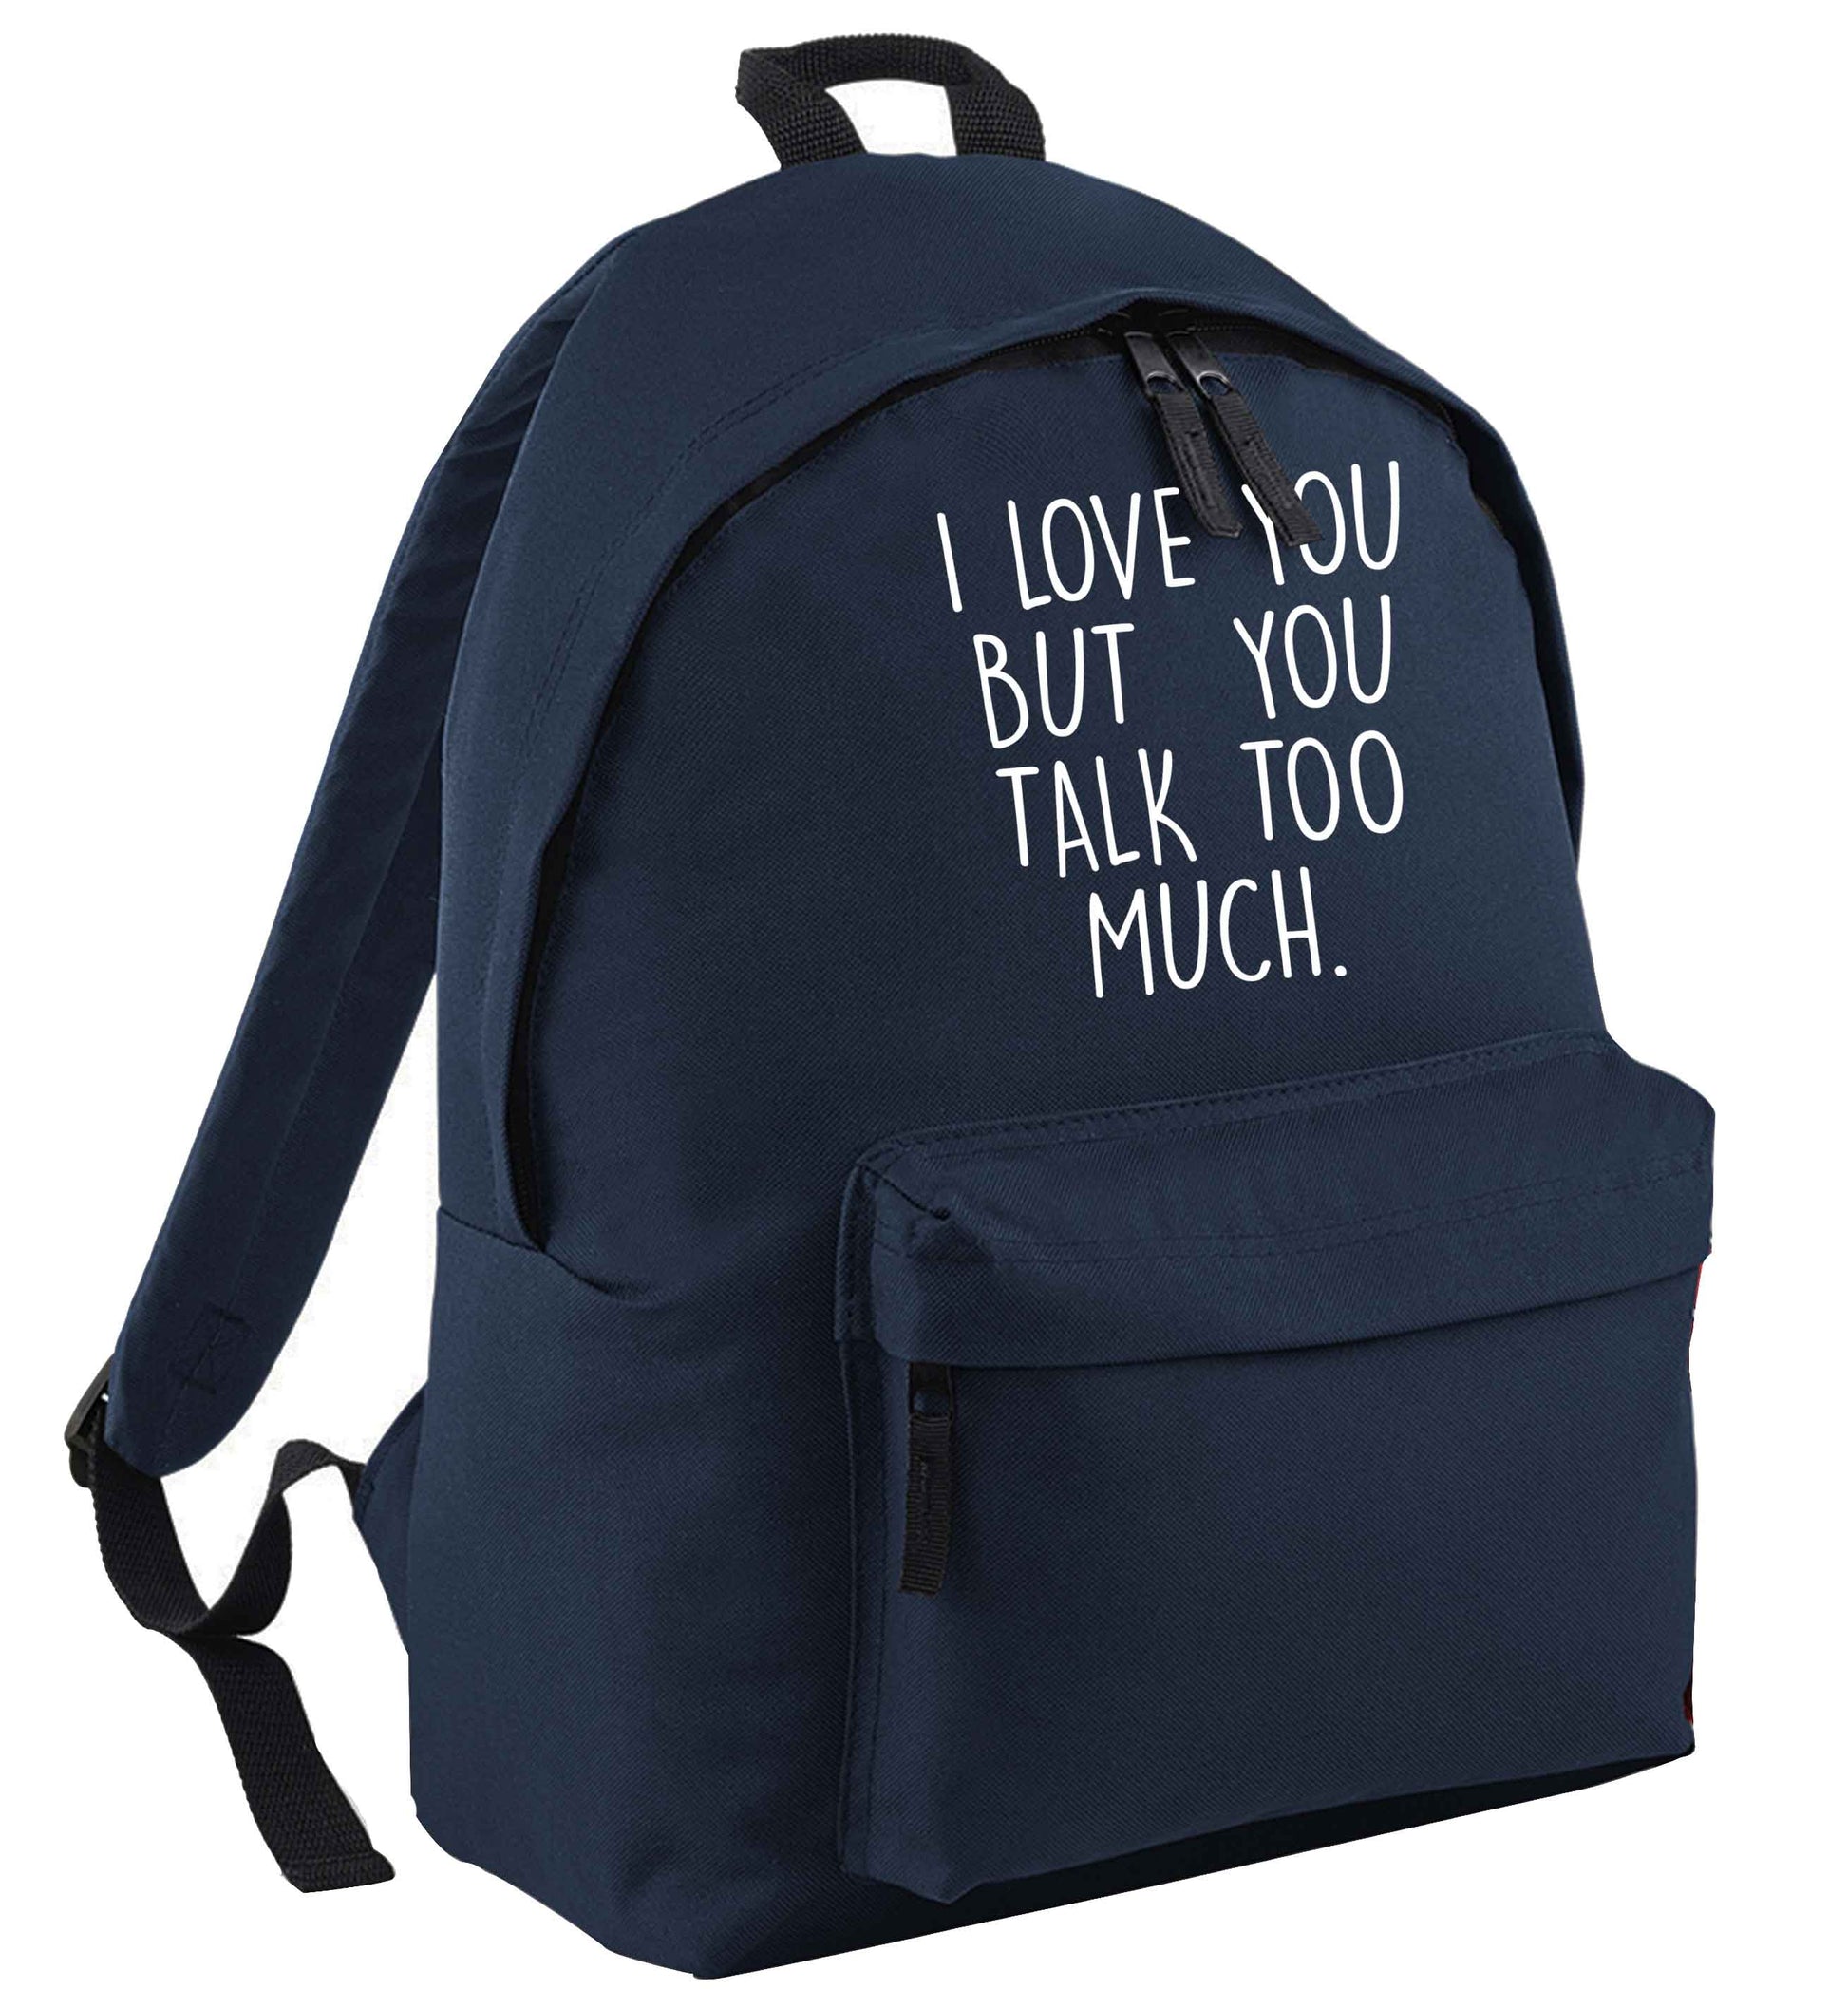 I love you but you talk too much | Children's backpack